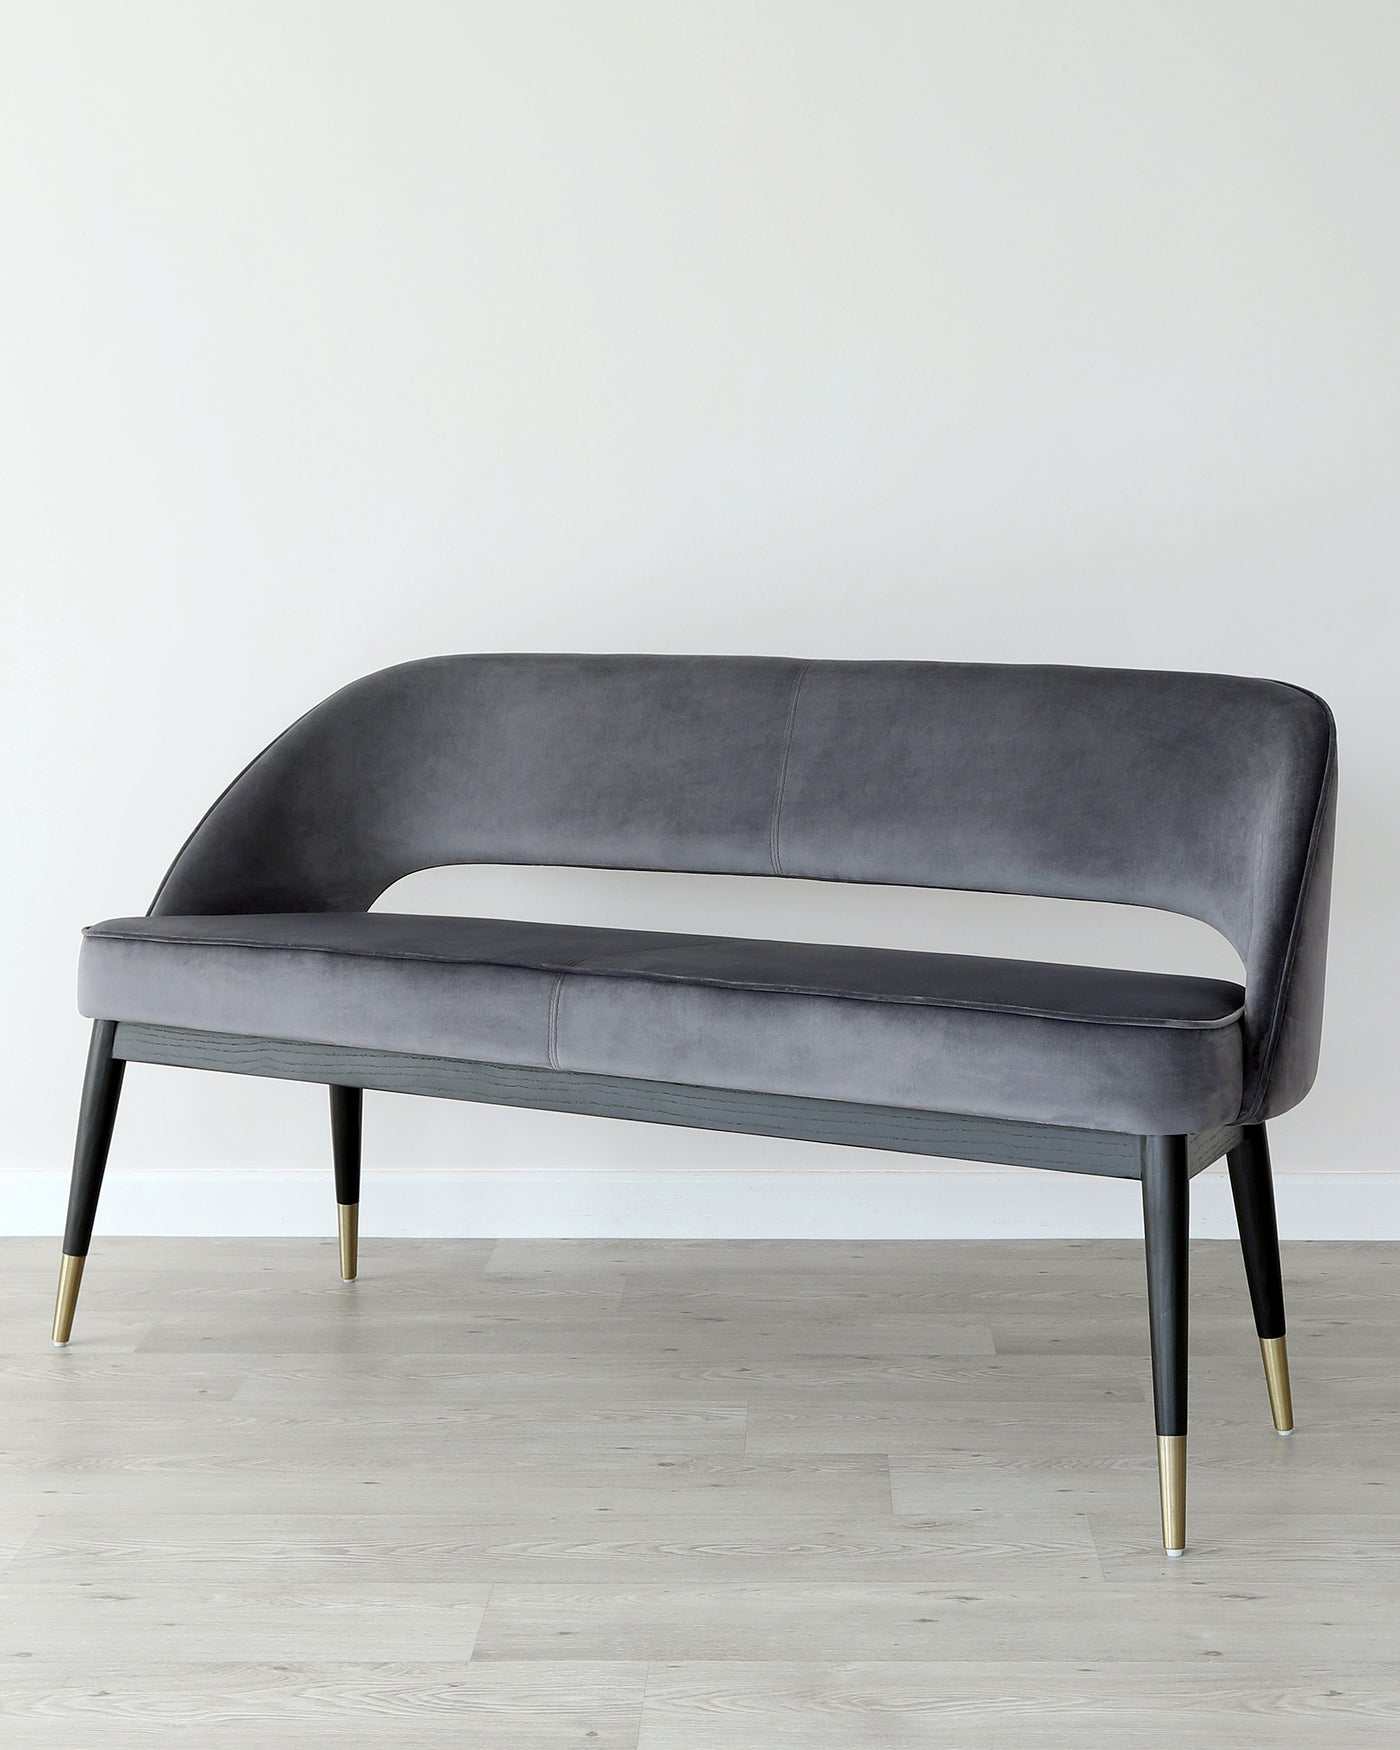 Elegant modern loveseat with a curved backrest, upholstered in a smooth grey fabric, featuring sleek black legs with gold-tone metal tips, positioned on a light wooden floor against a white backdrop.